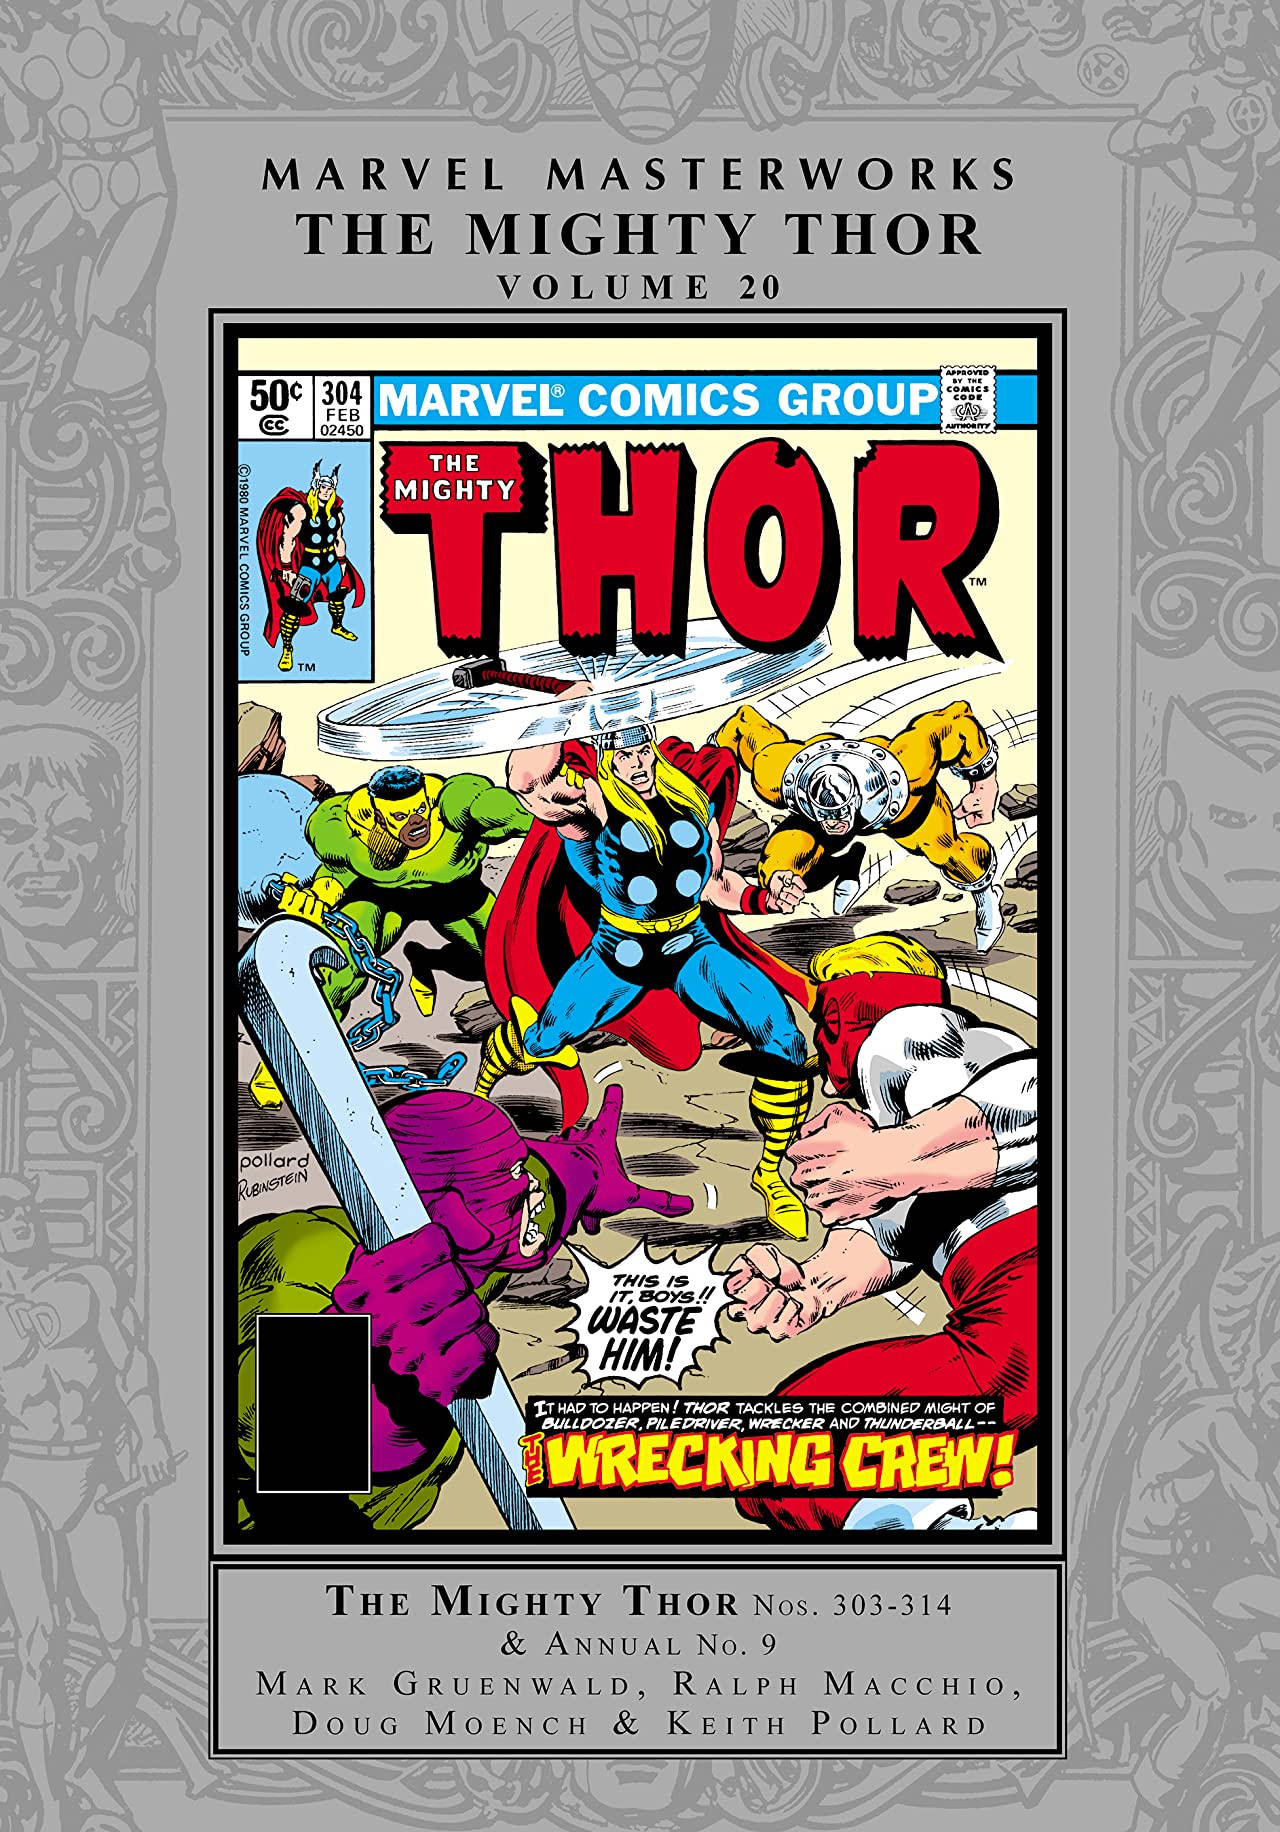 Marvel Masterworks: The Mighty Thor Vol. 20 (Hardcover)